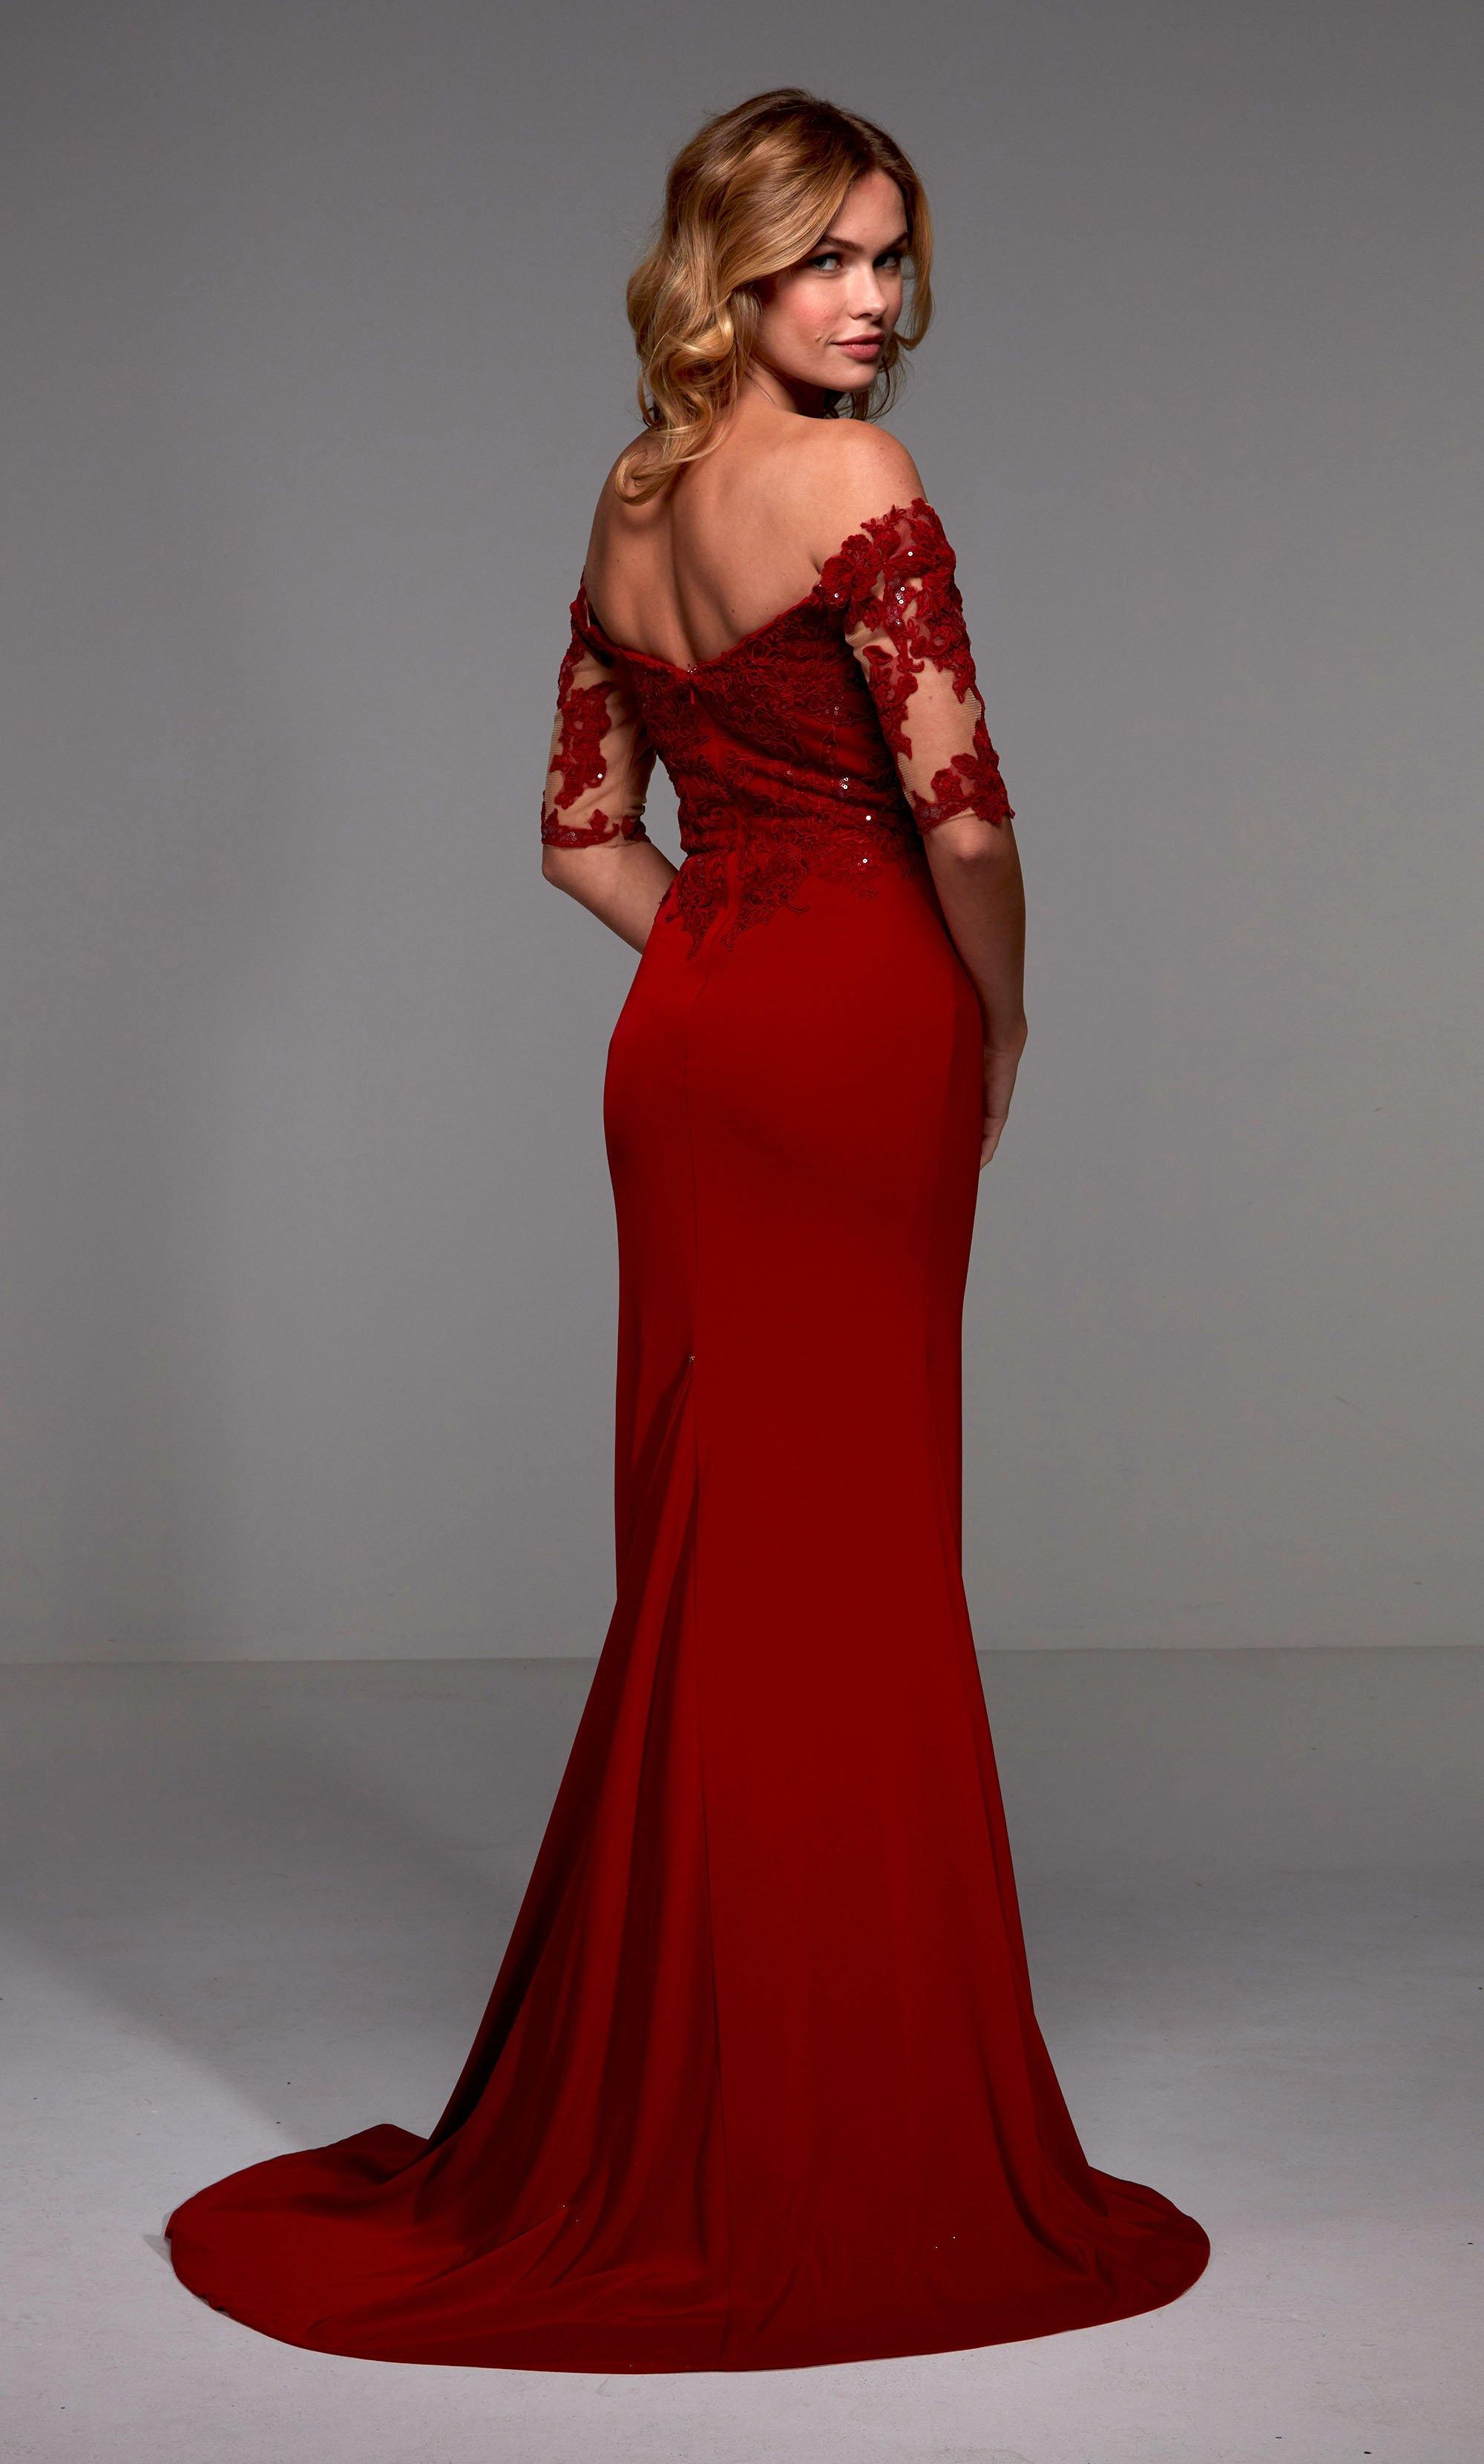 Formal Dress: 27518. Long Sexy Dresses, Off The Shoulder, Straight Alyce Paris